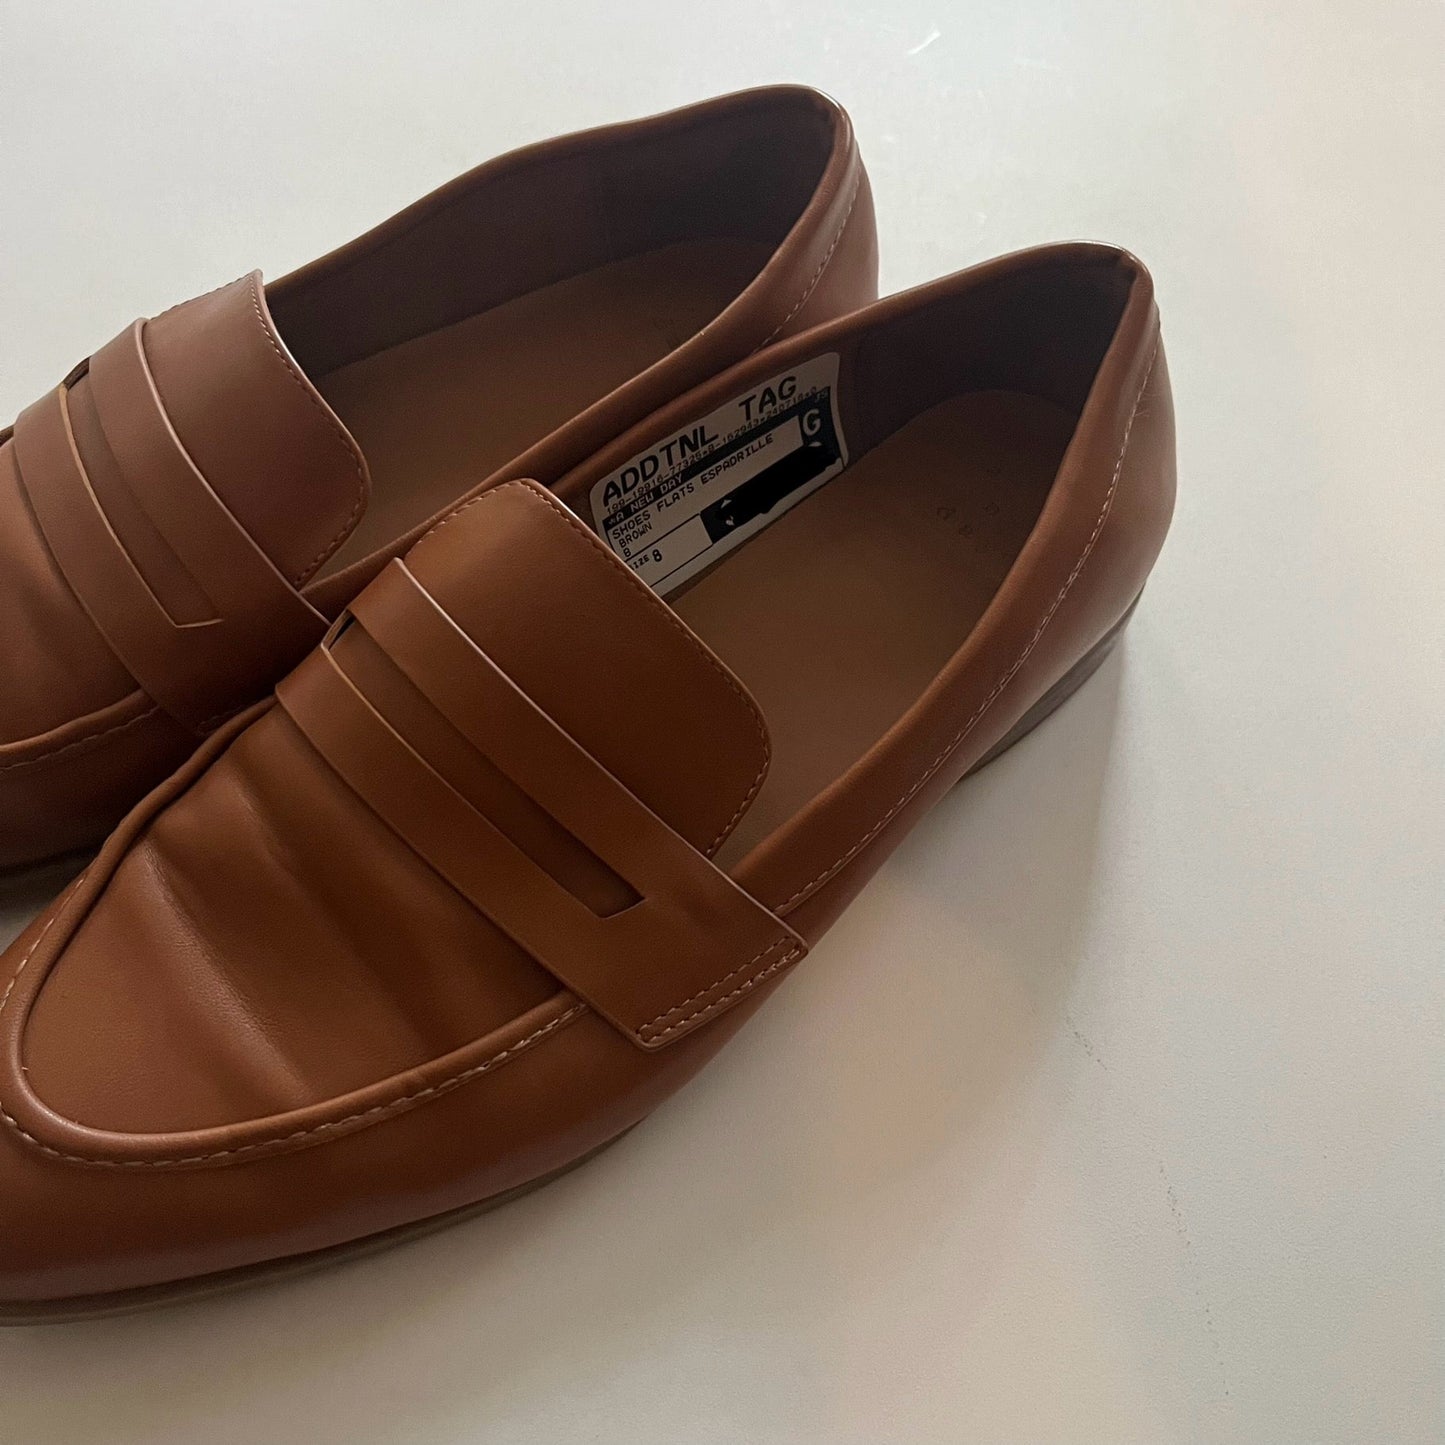 Brown Shoes Flats Espadrille A New Day, Size 8